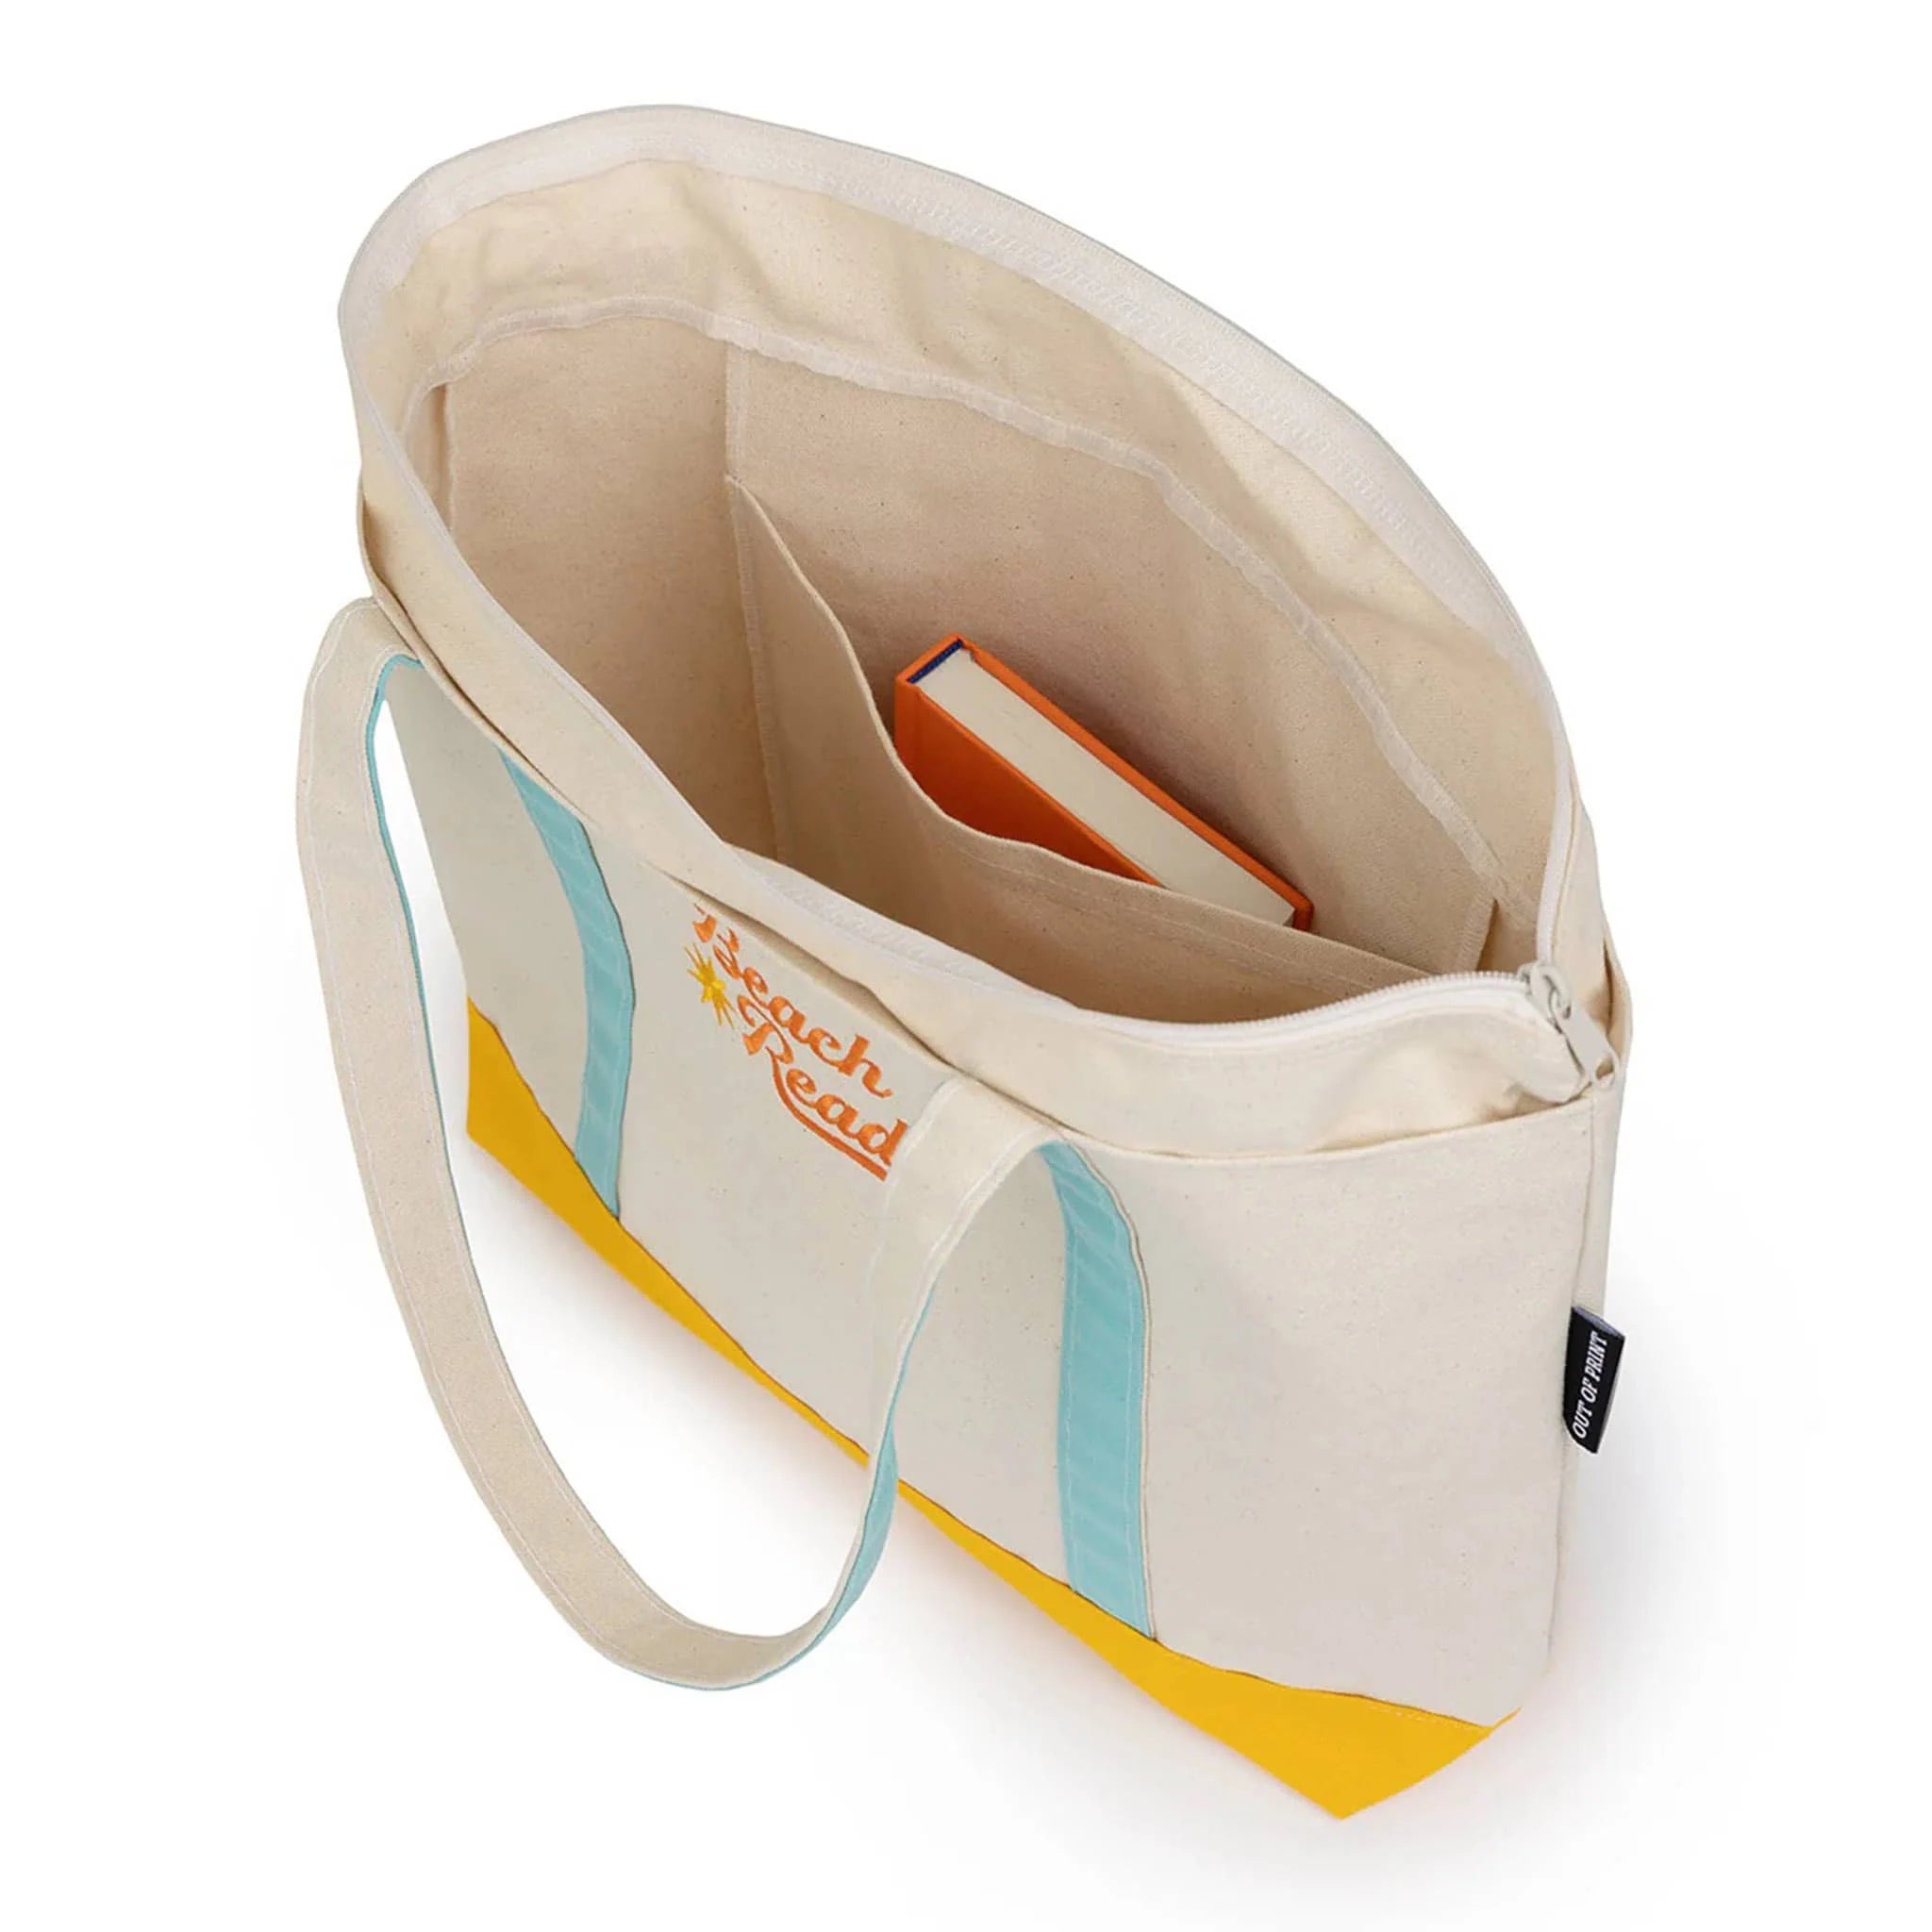 out-of-print-TOTE-1141-beach-reads-zippered-boat-tote-bag-overhead-9780593896143.webp